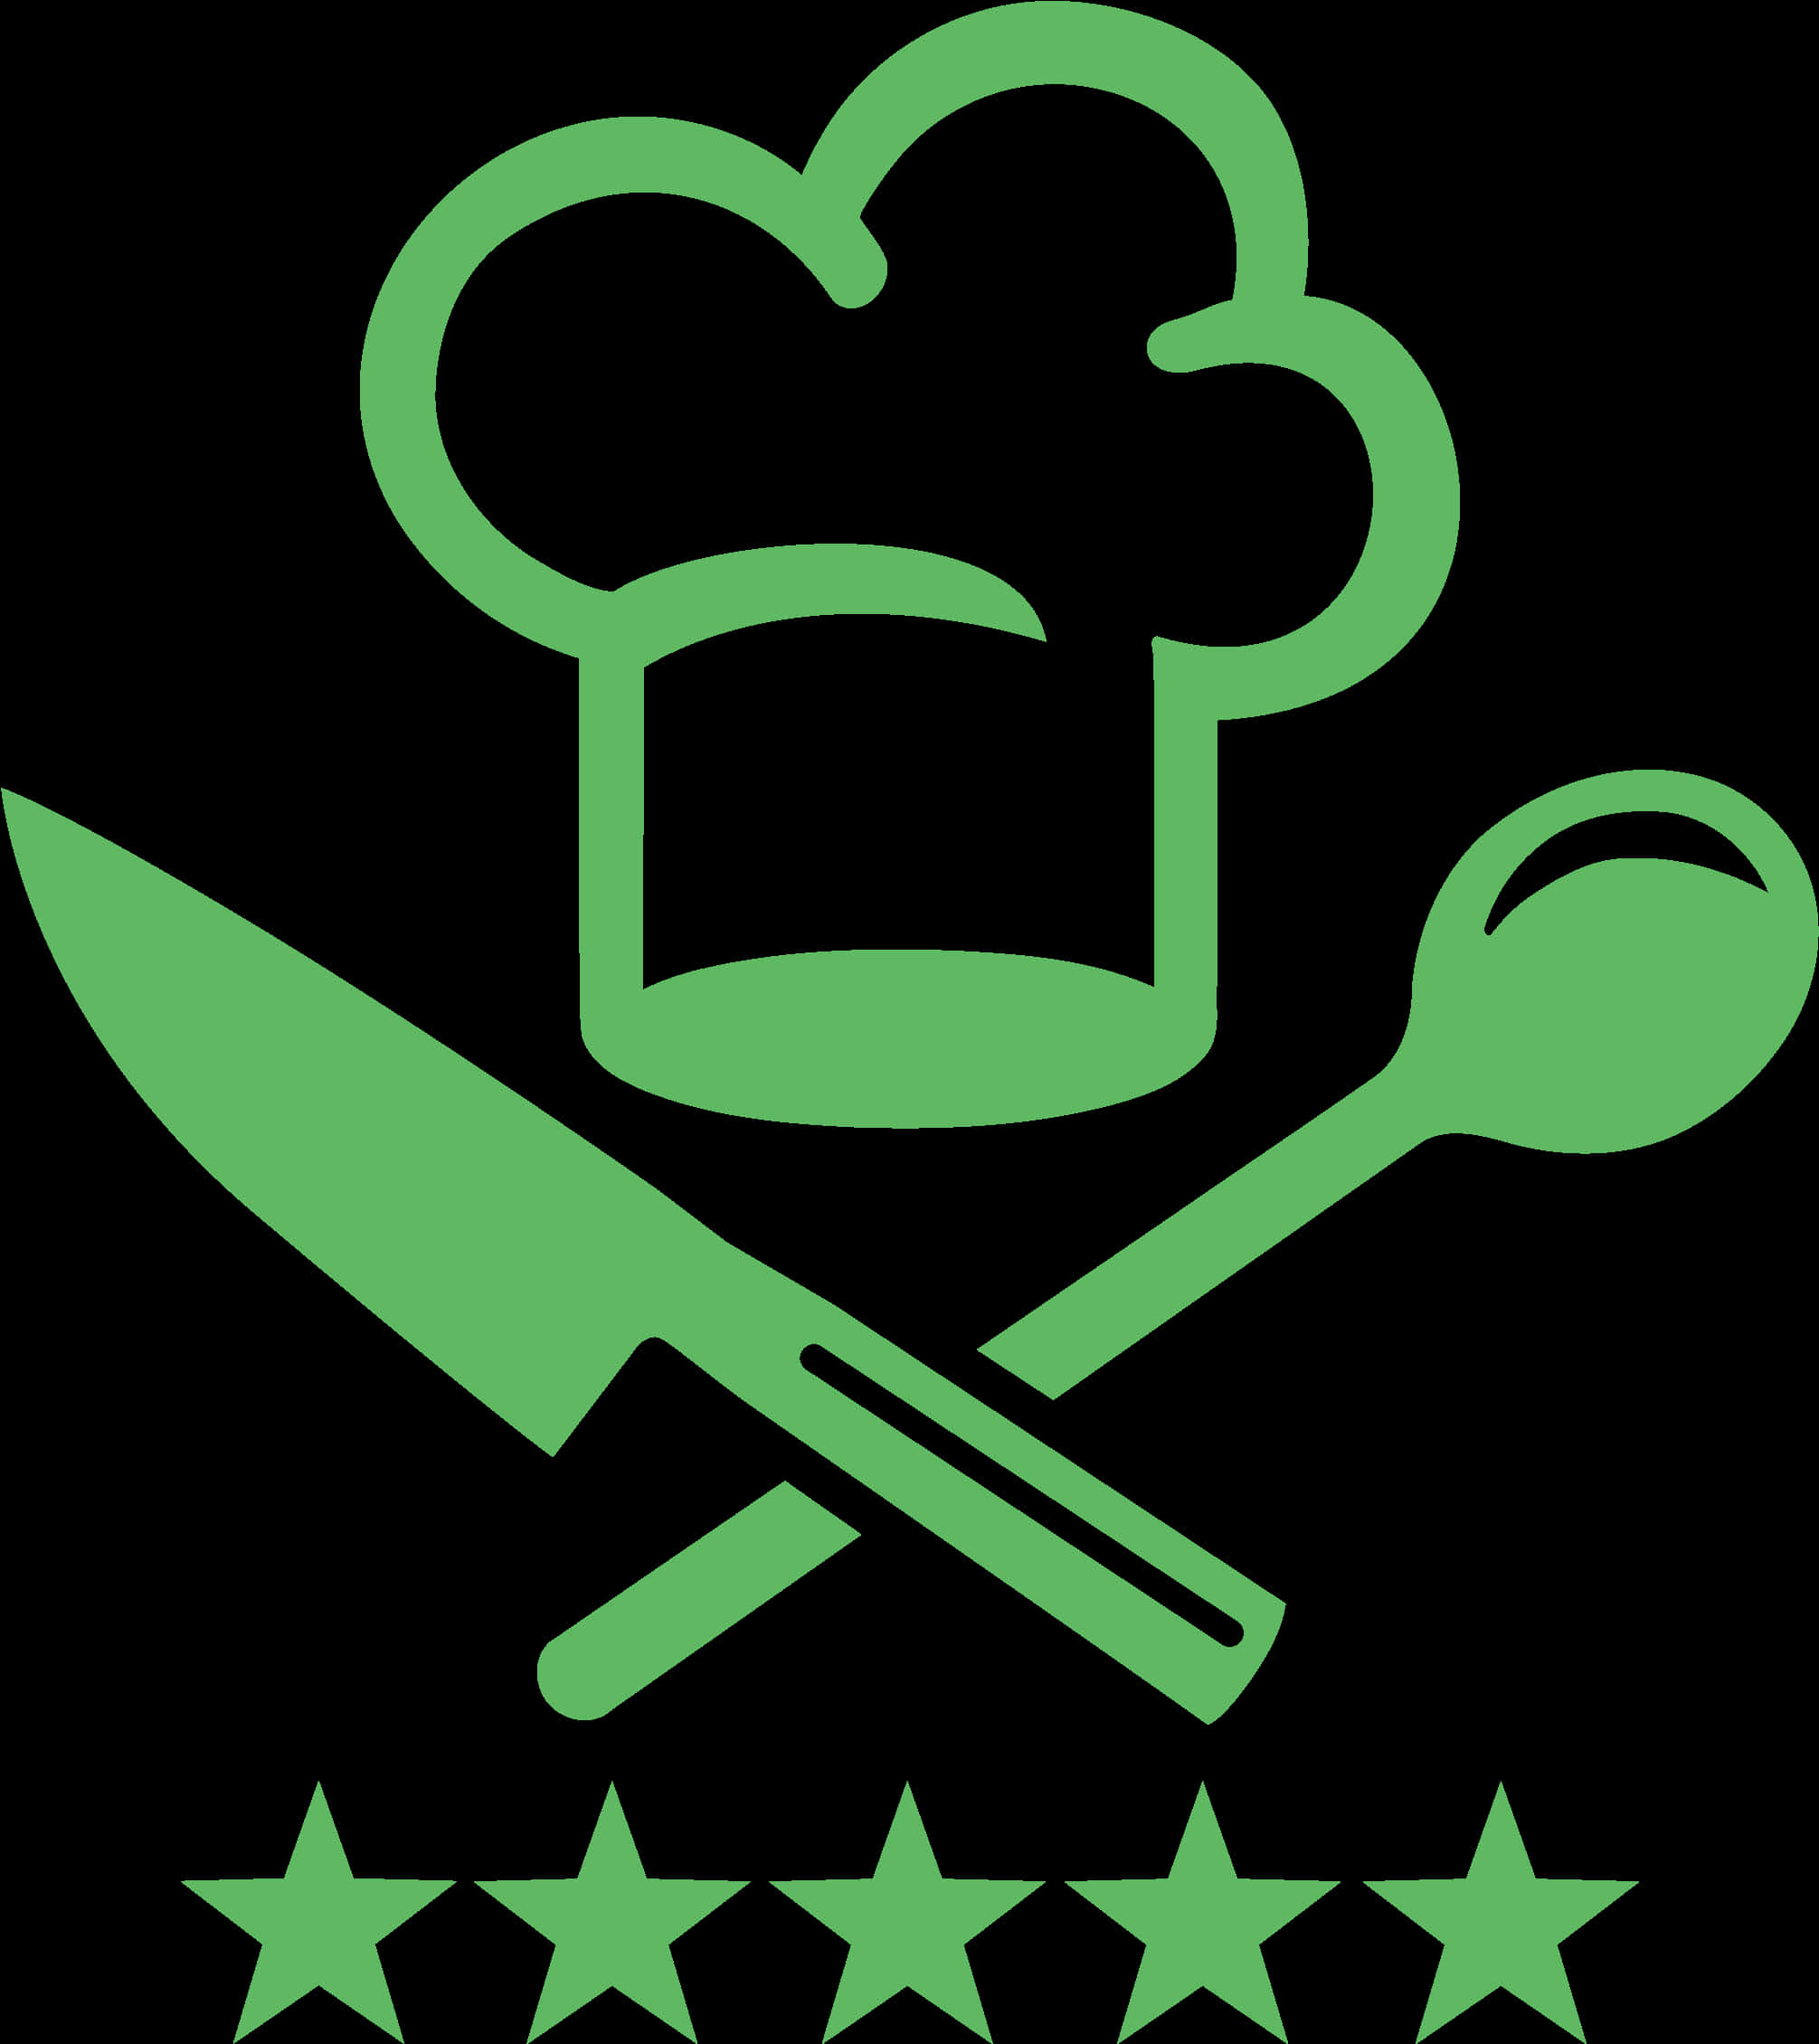 Chef Hat Knife Spoon Rating Stars Graphic